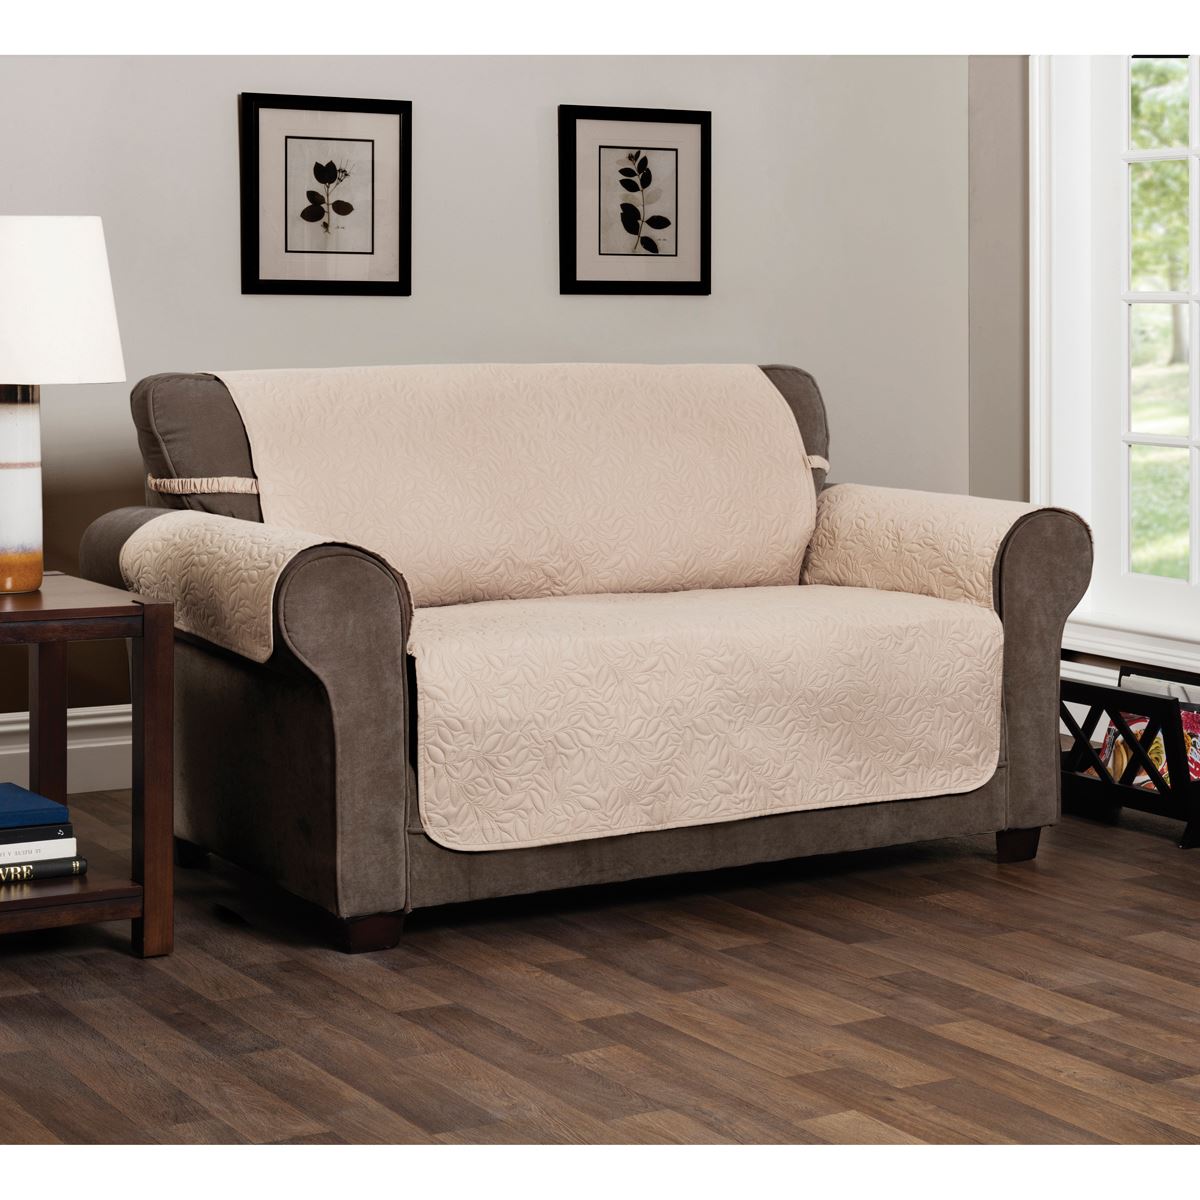 Innovative Textile Solutions Belmont Secure Fit Slipcover